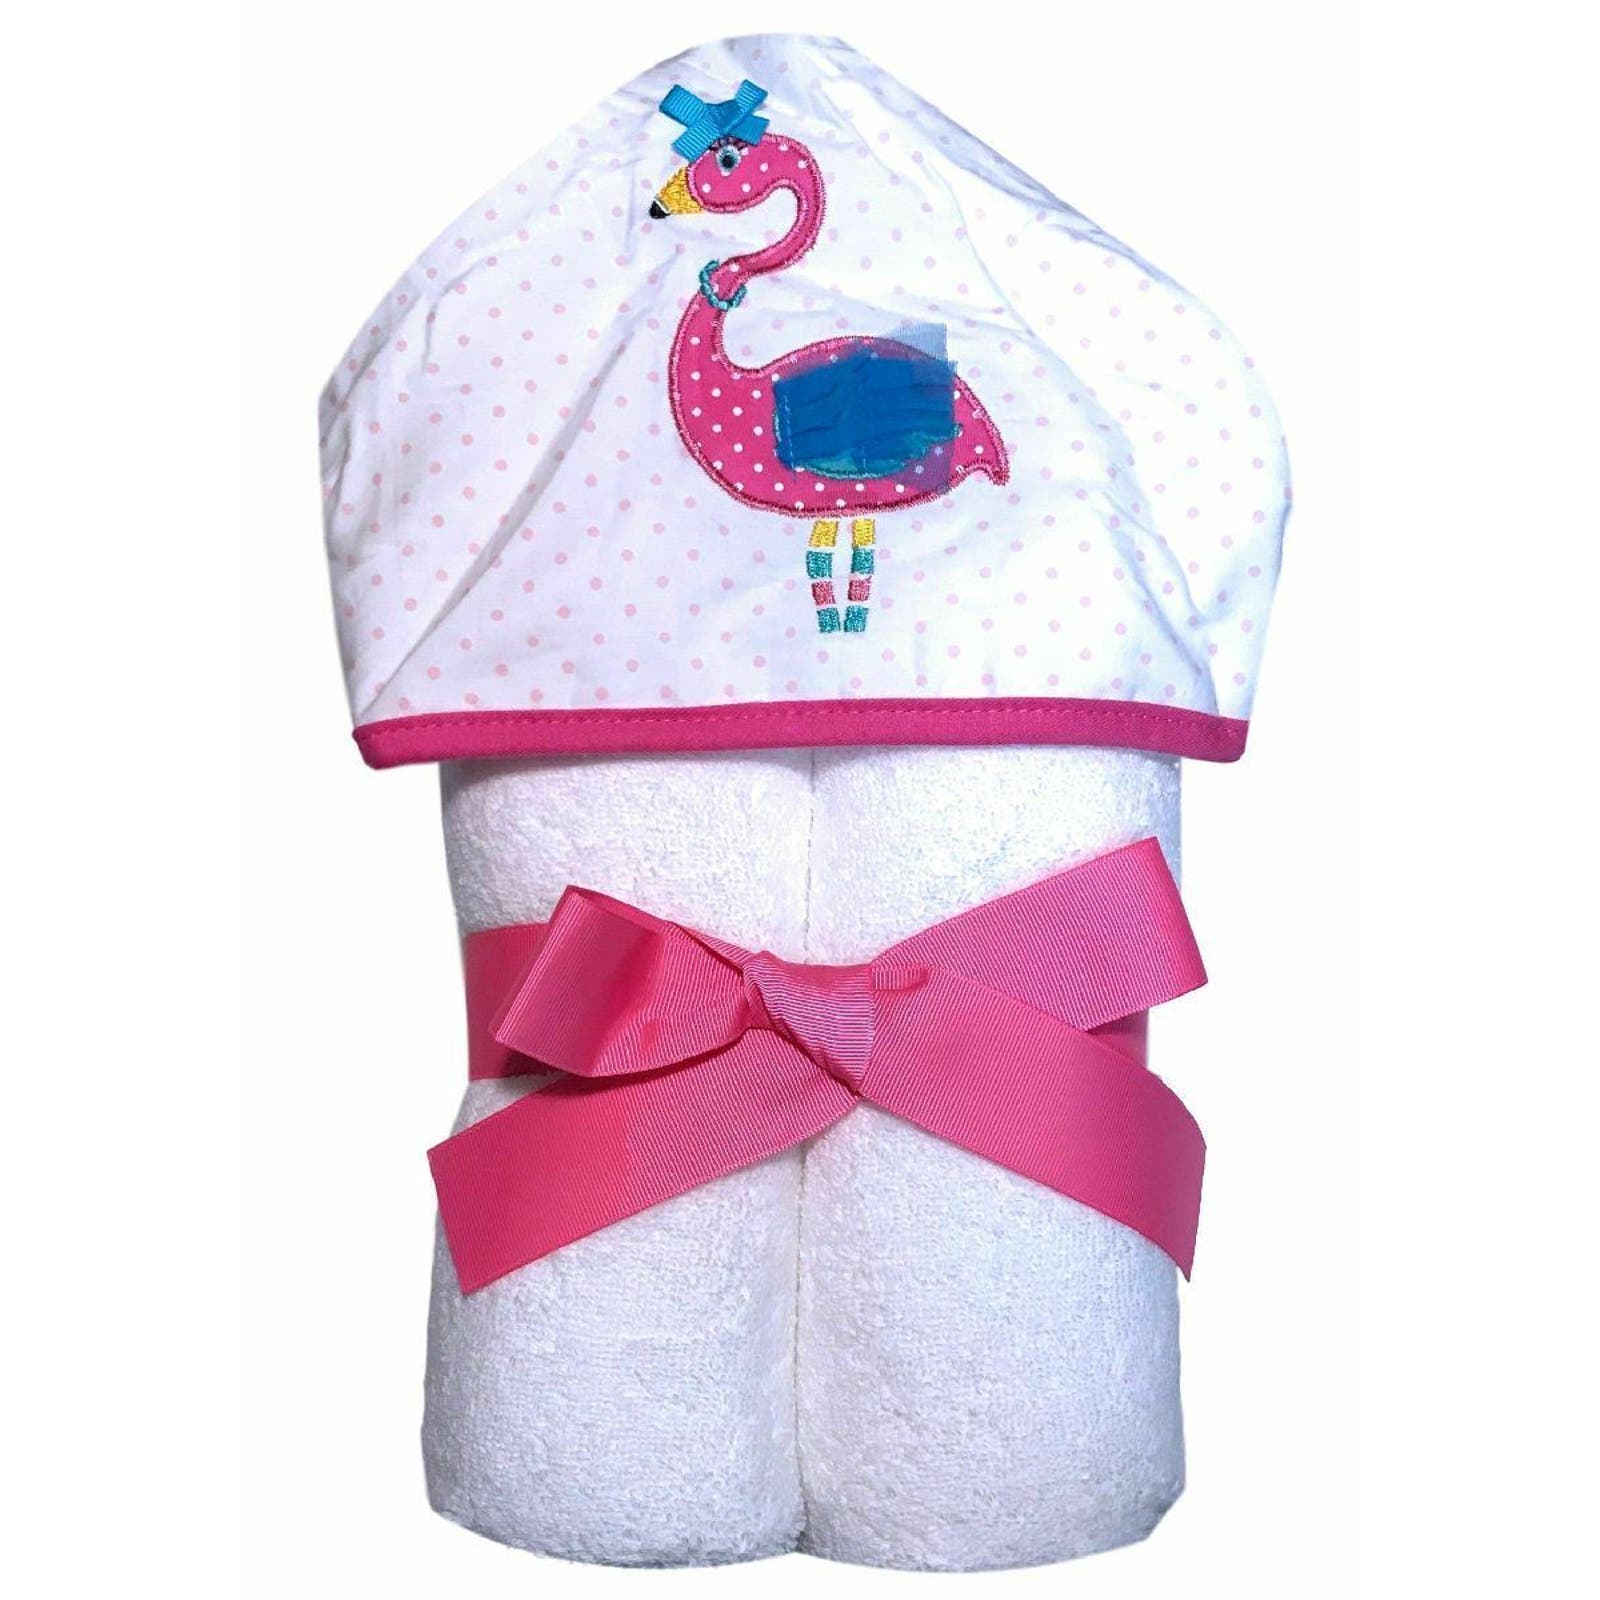 Hooded Flamingo Towel For Kids 100% Cotton For Beach Bath Pool 28x52 Inches NWT